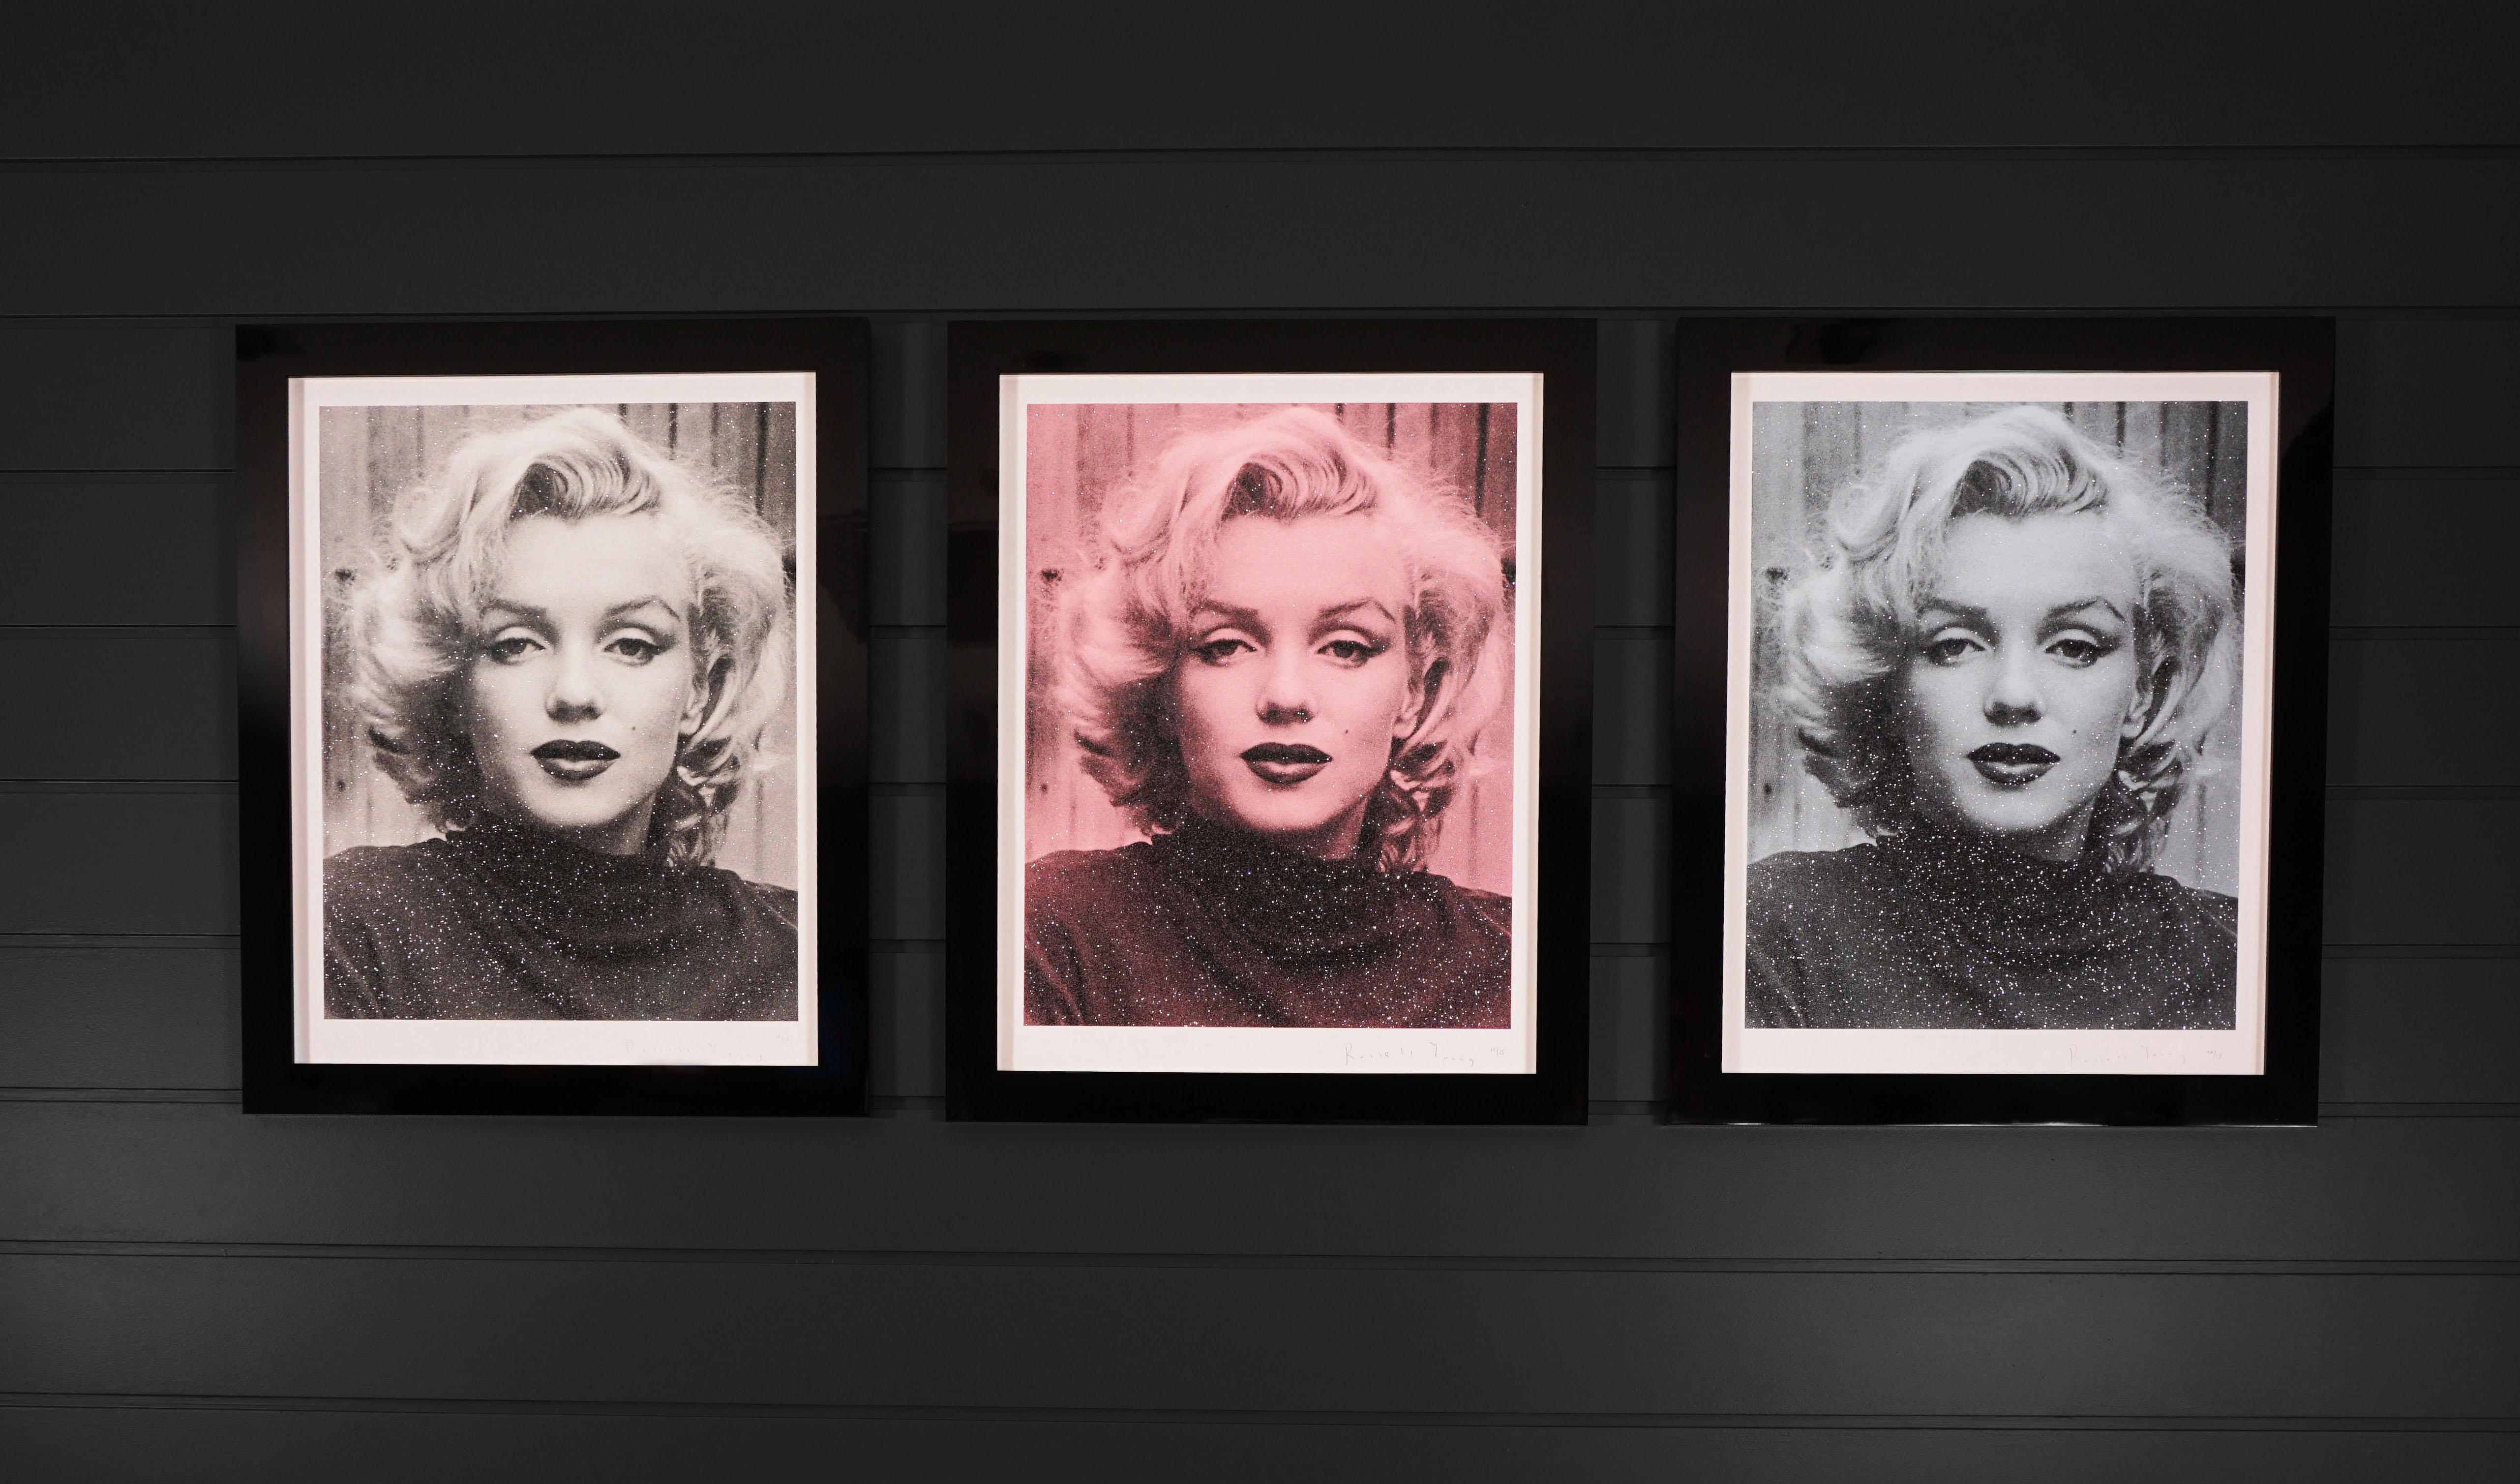 Russell Young, Marilyn with Diamond Dust in Black & White, 2019 1